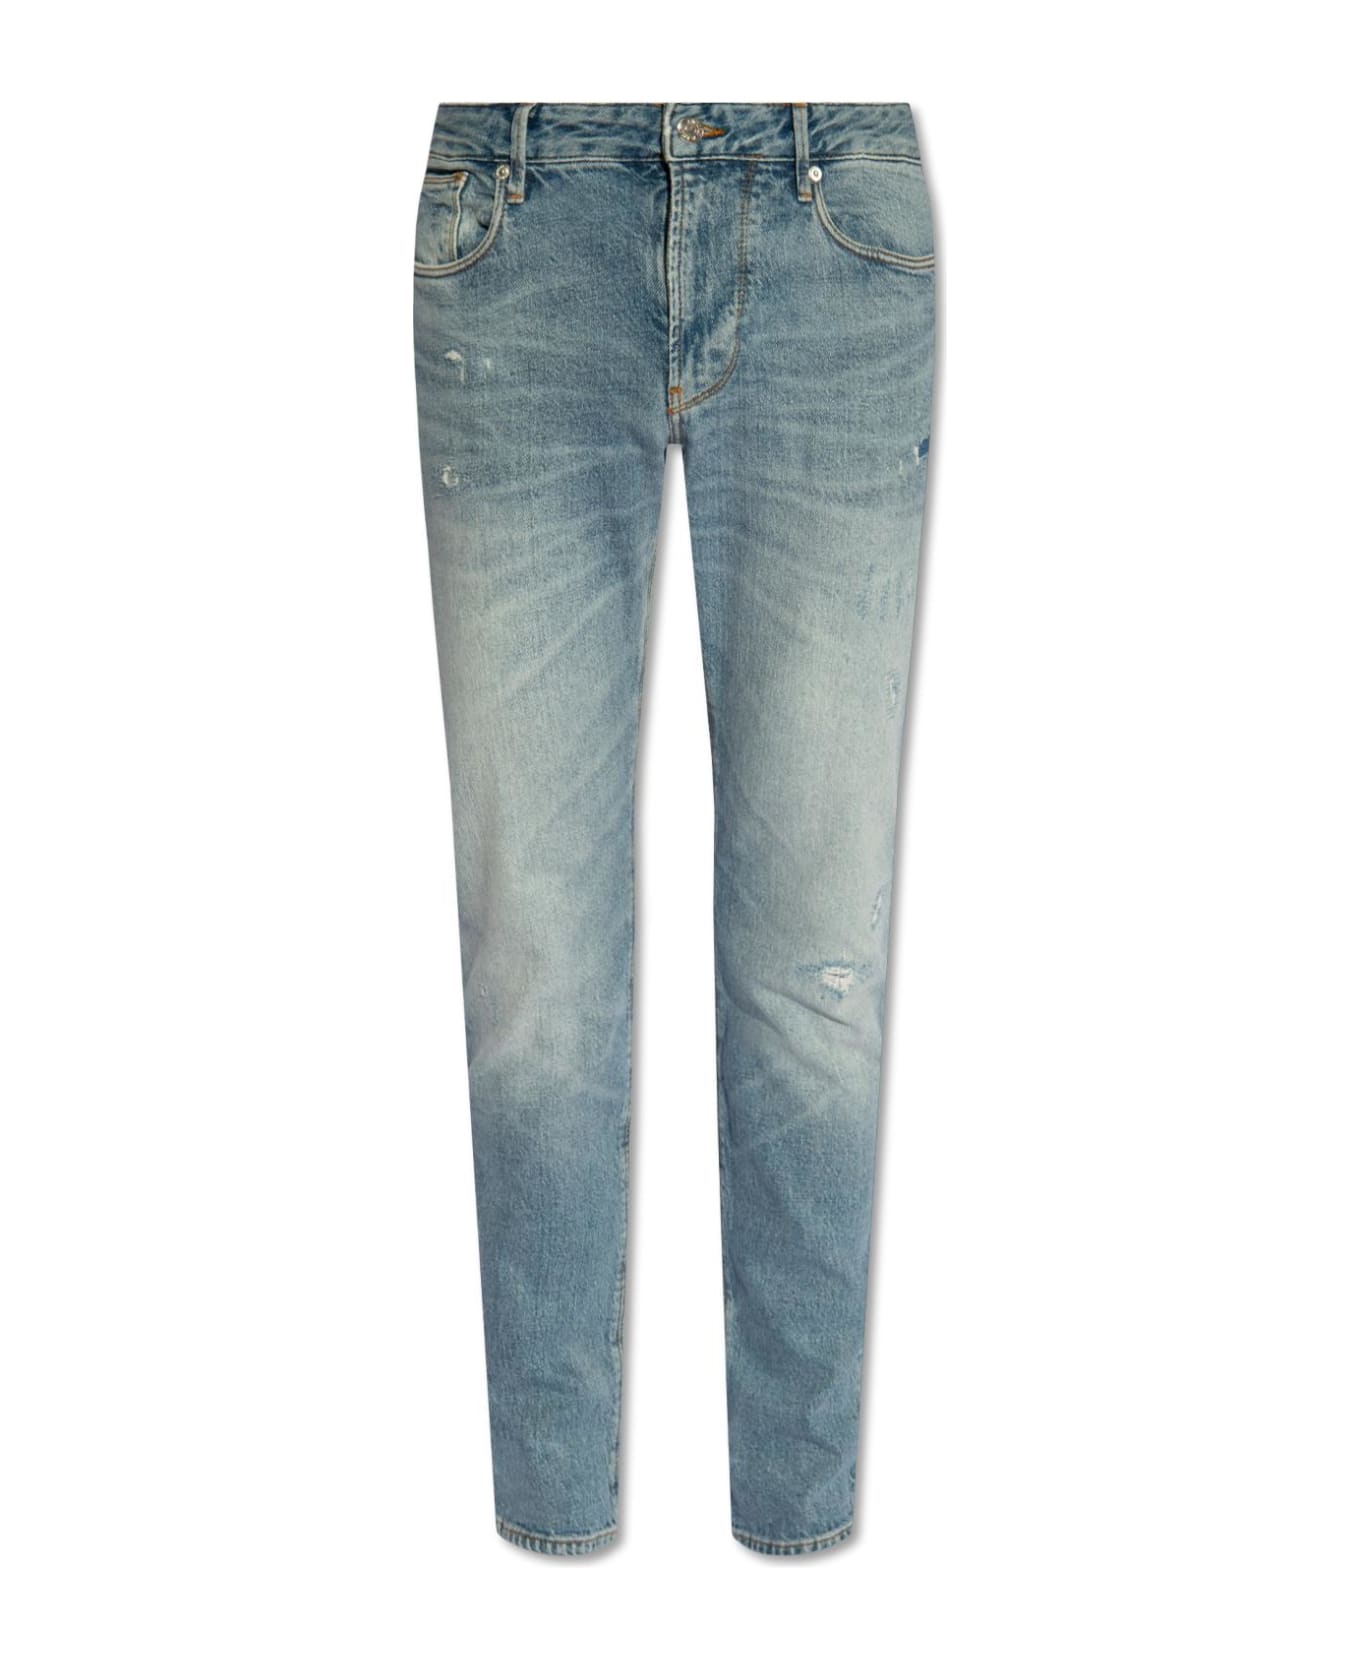 Emporio Armani Slim-fit Jeans - Stone Washed